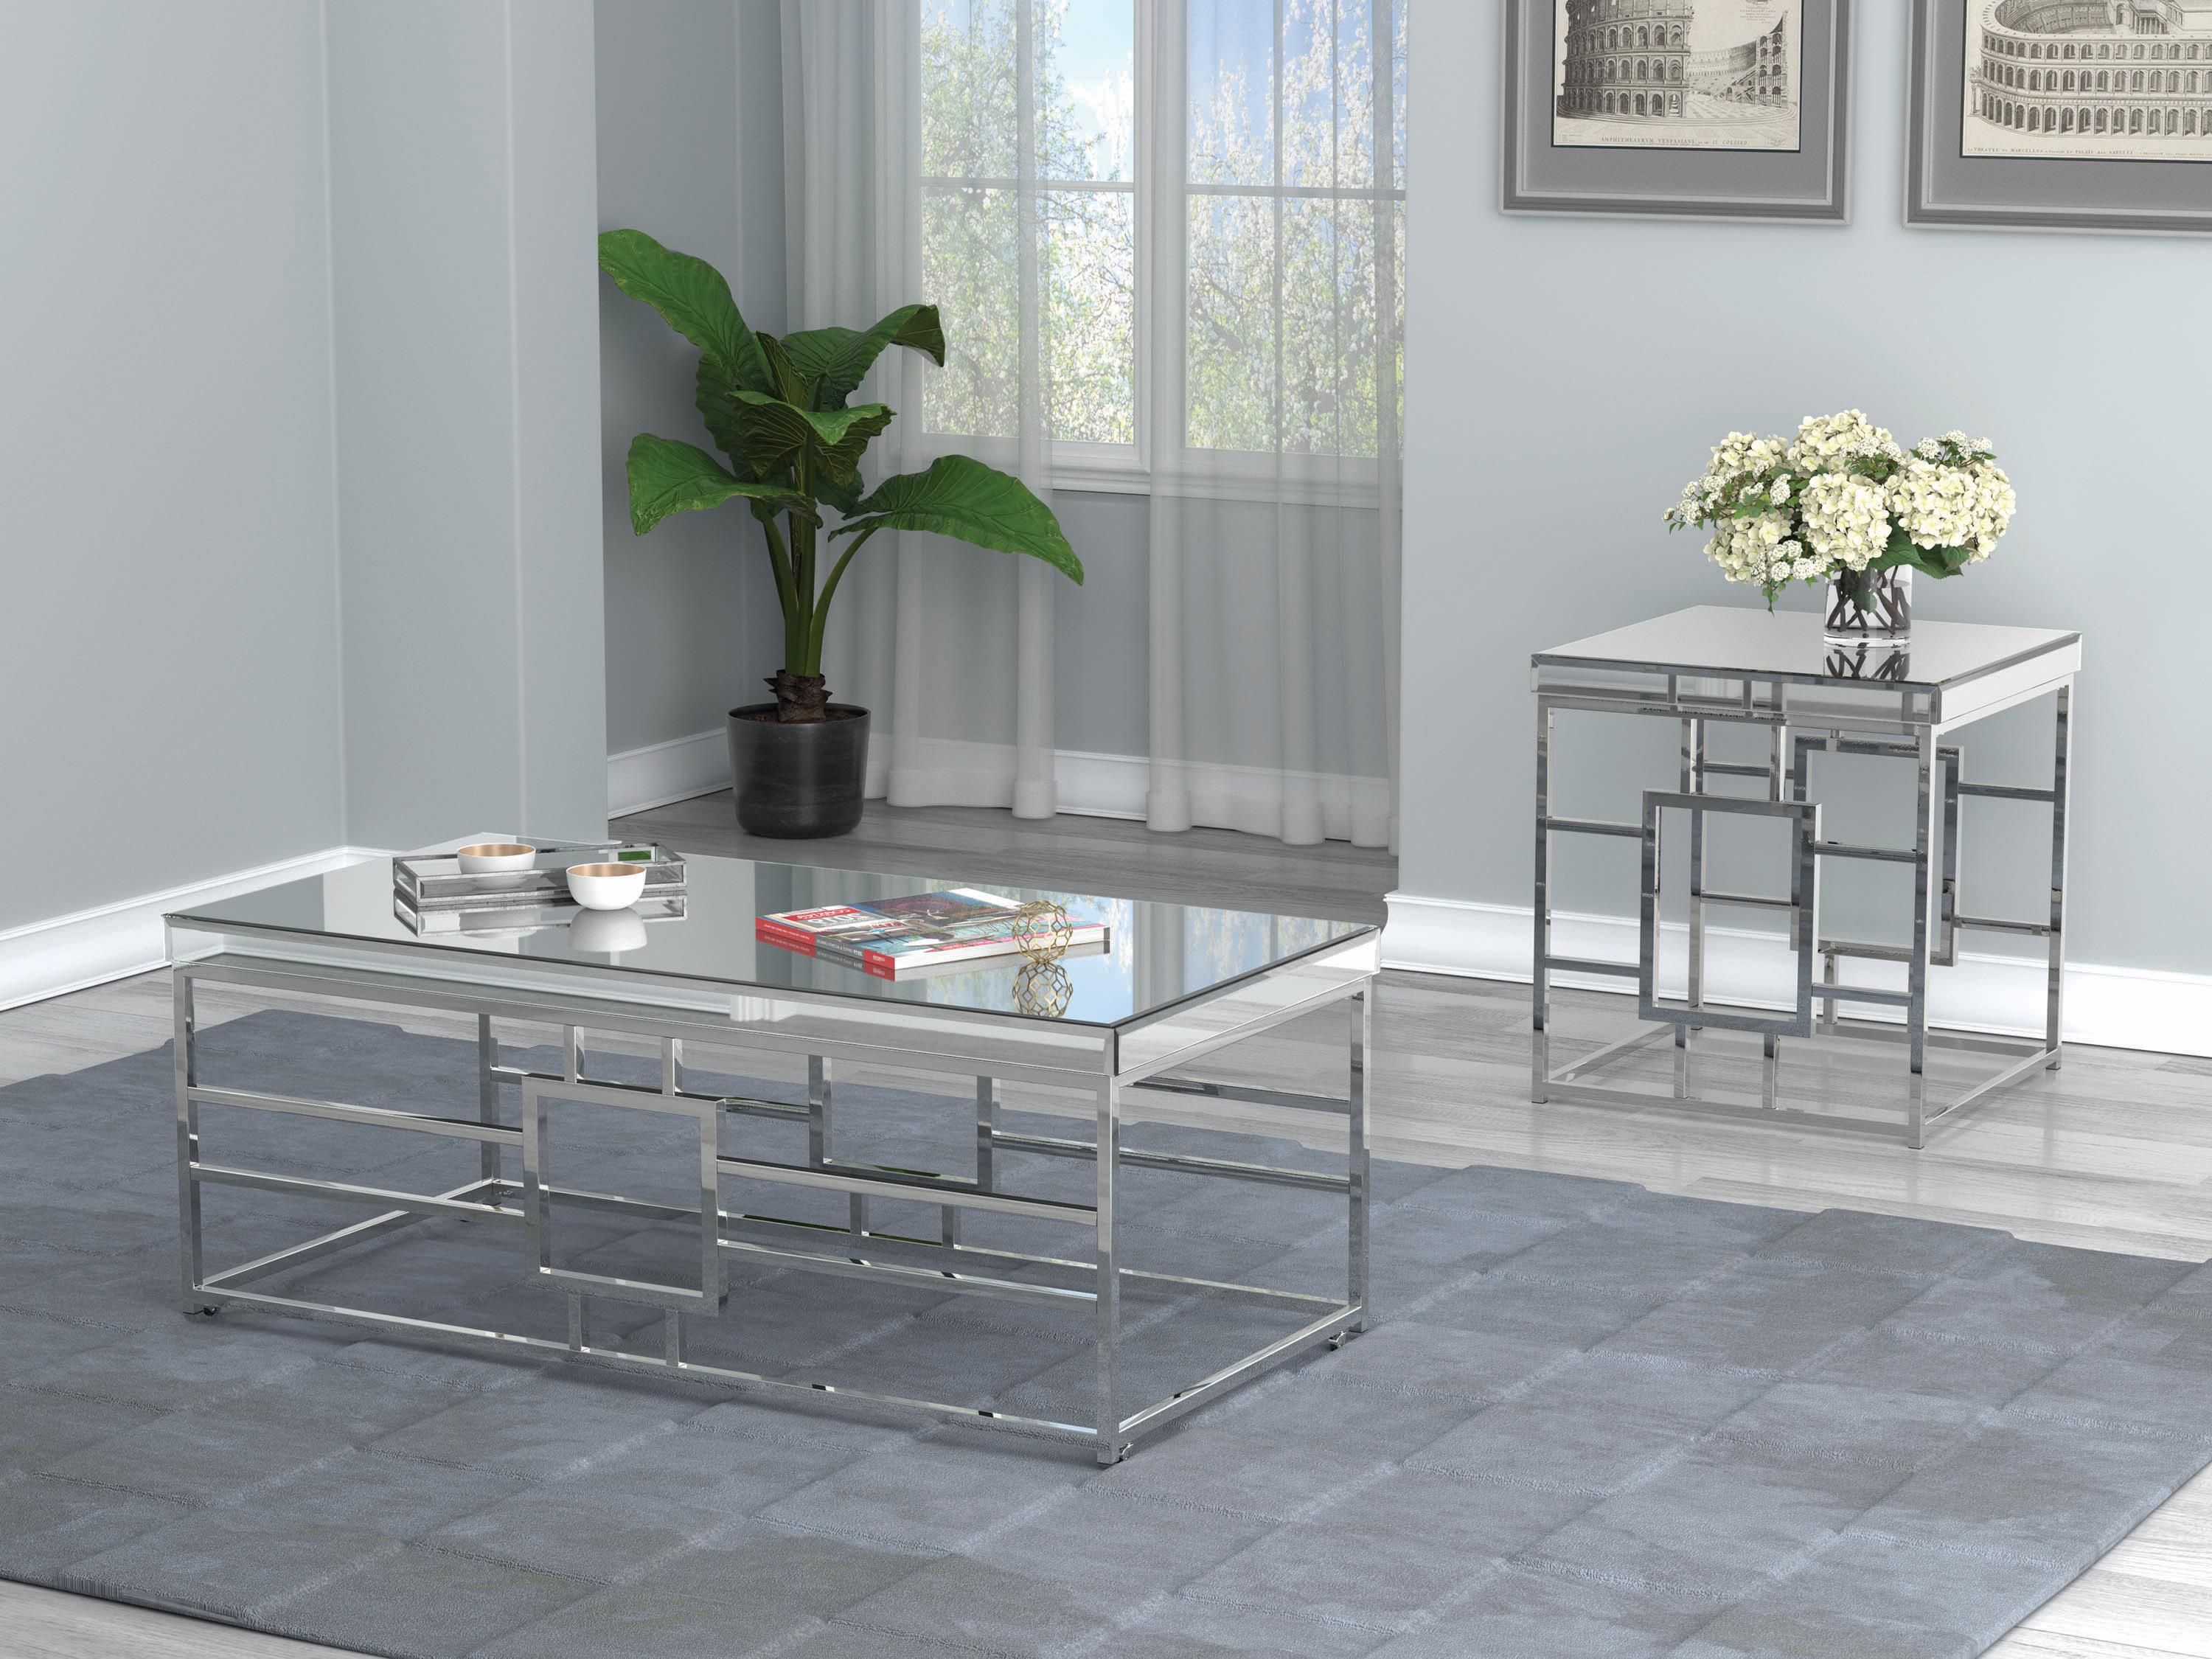 Contemporary Coffee Table Set 723078-S2 723078-S2 in Chrome 